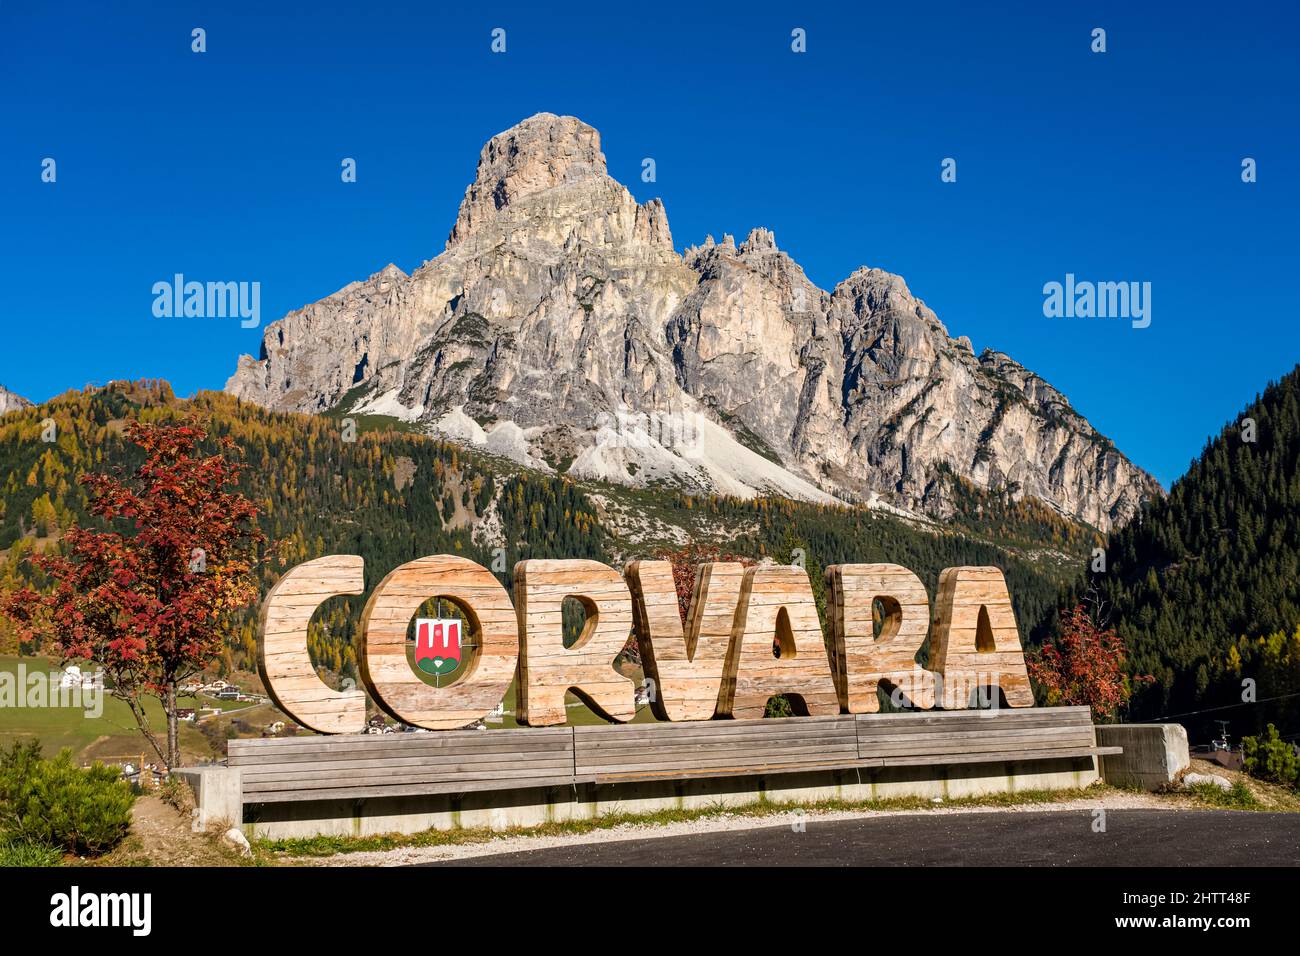 Mountain Mt. Sassongher, Sass Songher, raising above the town and colorful trees in autumn, the name Corvara cut in wood. Stock Photo